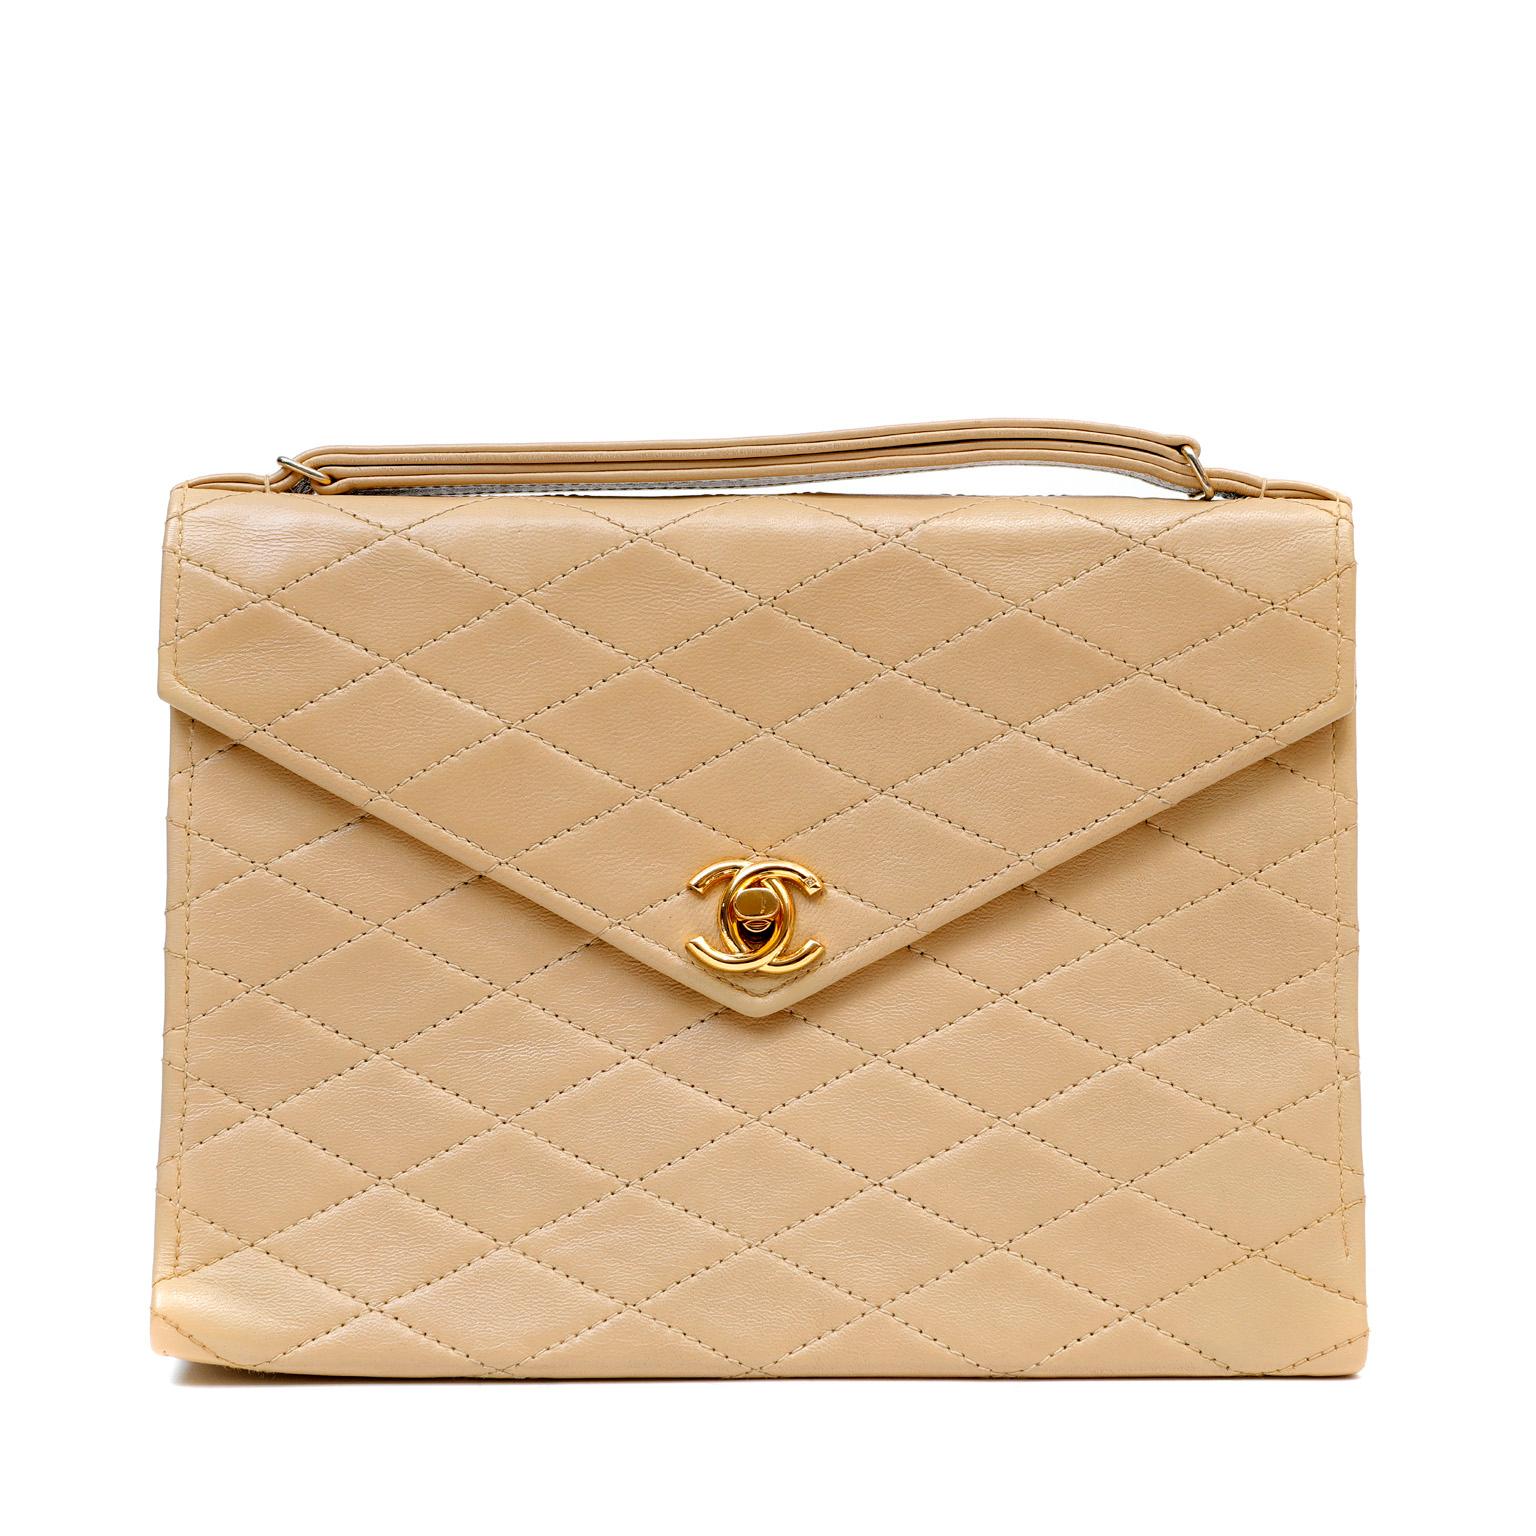 This authentic Chanel Beige Leather Vintage Envelope Flap Bag is in excellent plus condition.  An early vintage piece is rarely found as nearly pristine as this beautiful classic.  Neutral beige leather is stitched in signature Chanel diamond